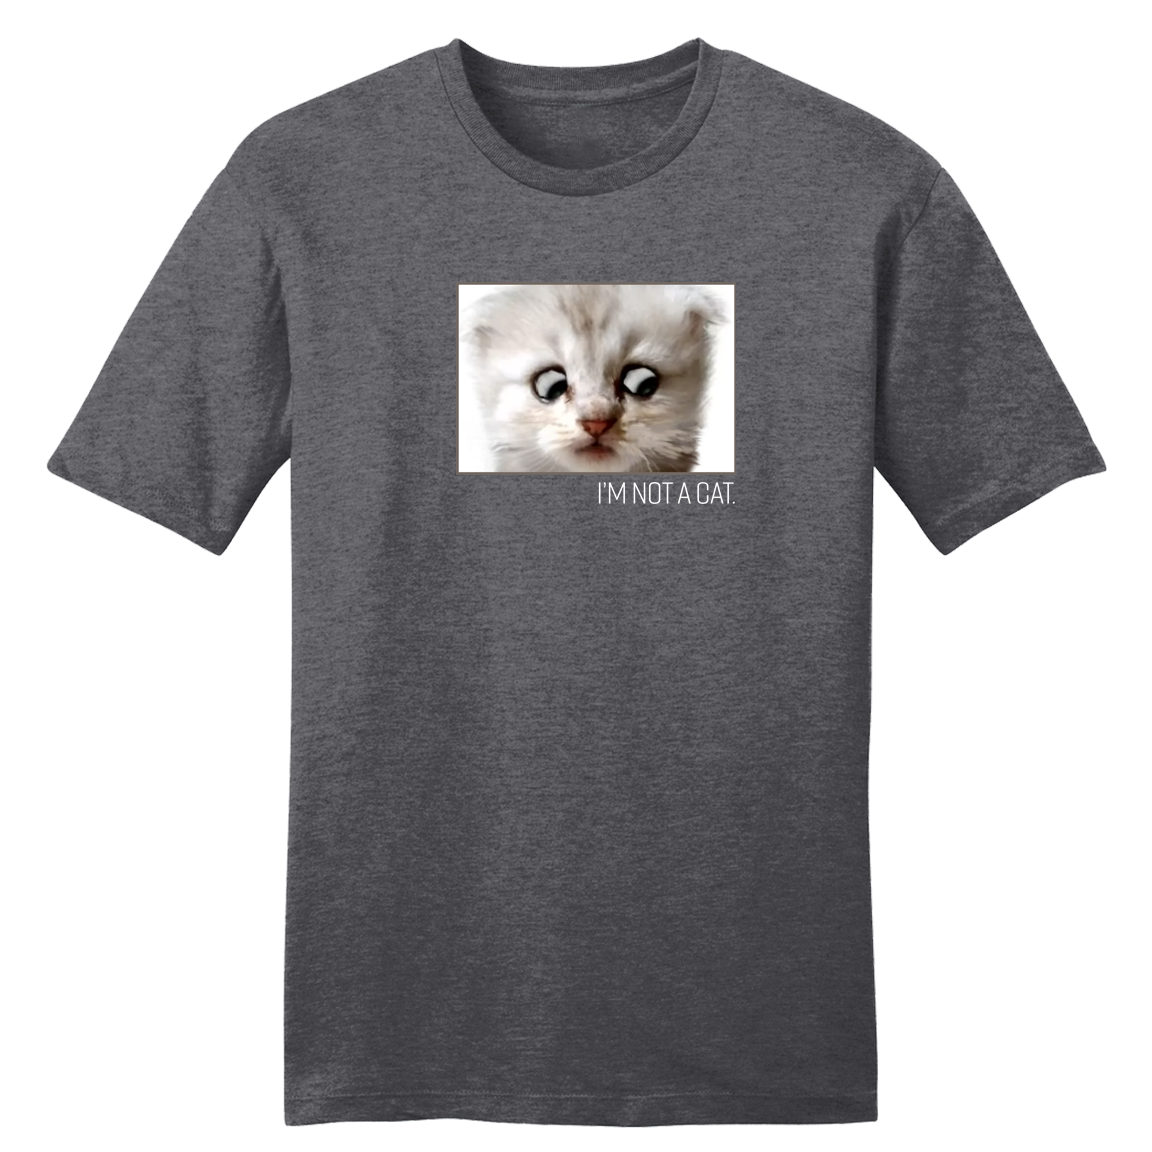 I'm Not a Cat Heather Charcoal tee